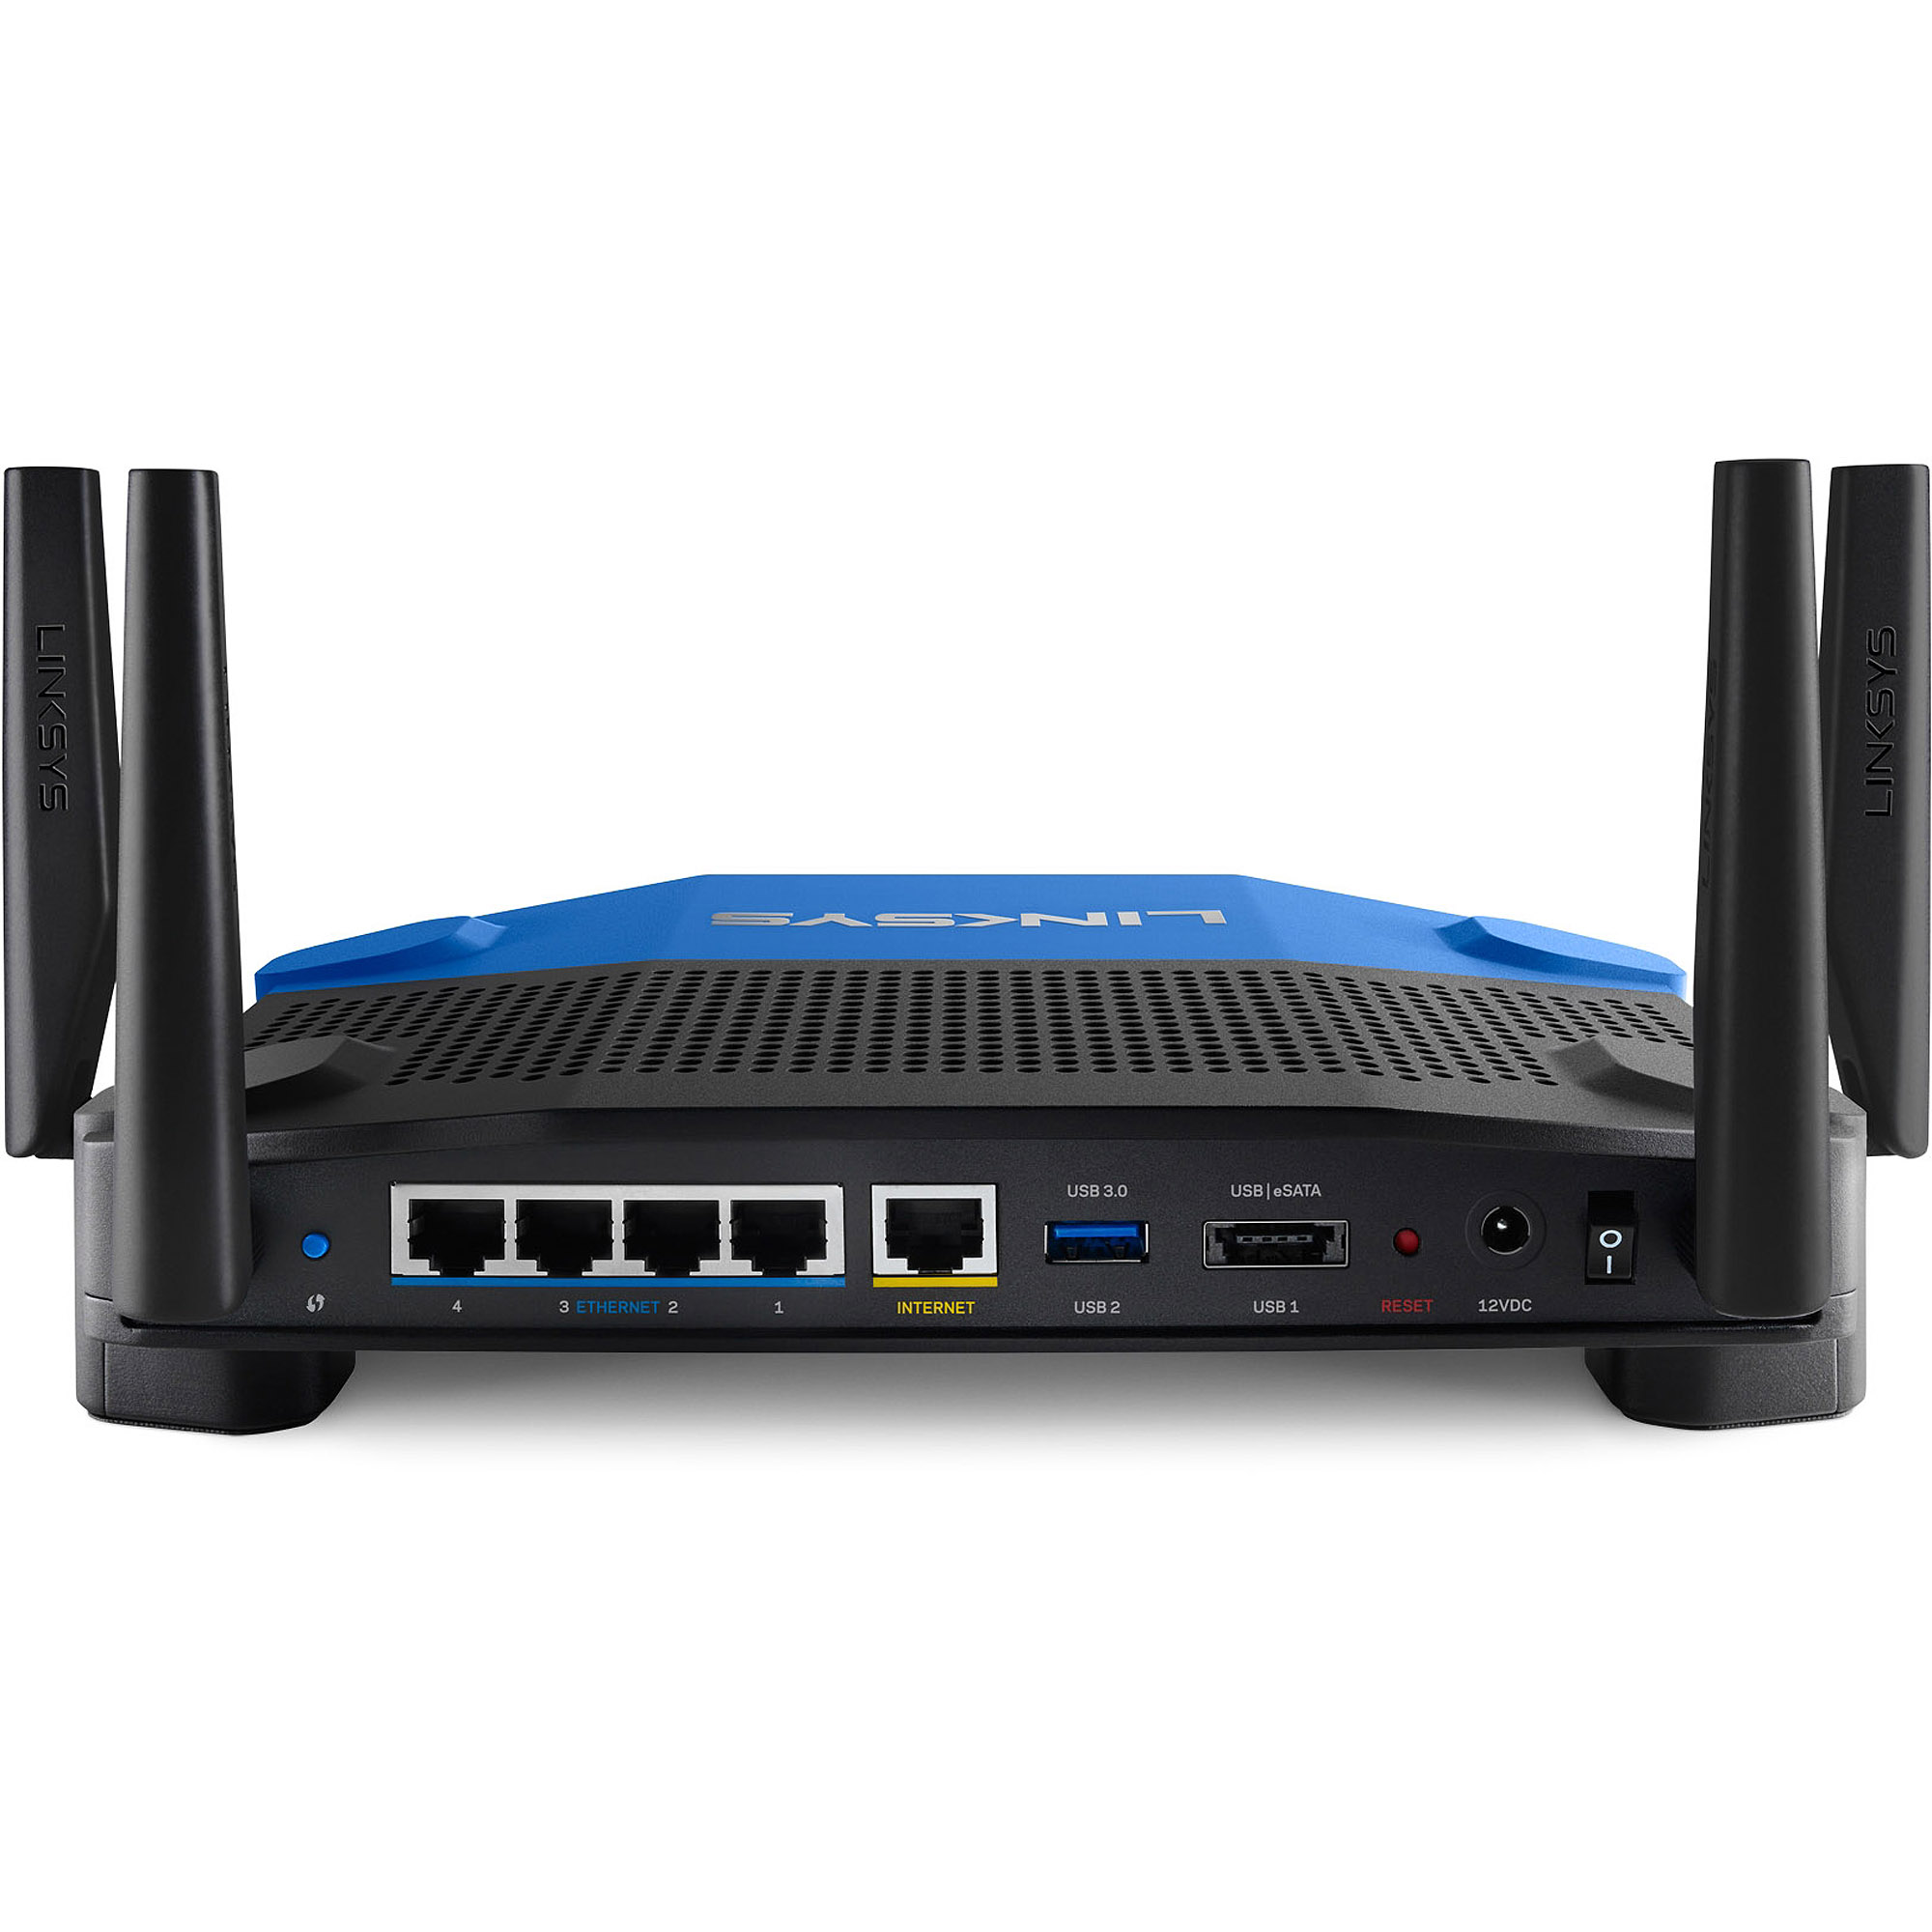 Linksys Dual-Band AC1900 Wireless Wi-Fi Router (WRT1900AC) - image 4 of 4